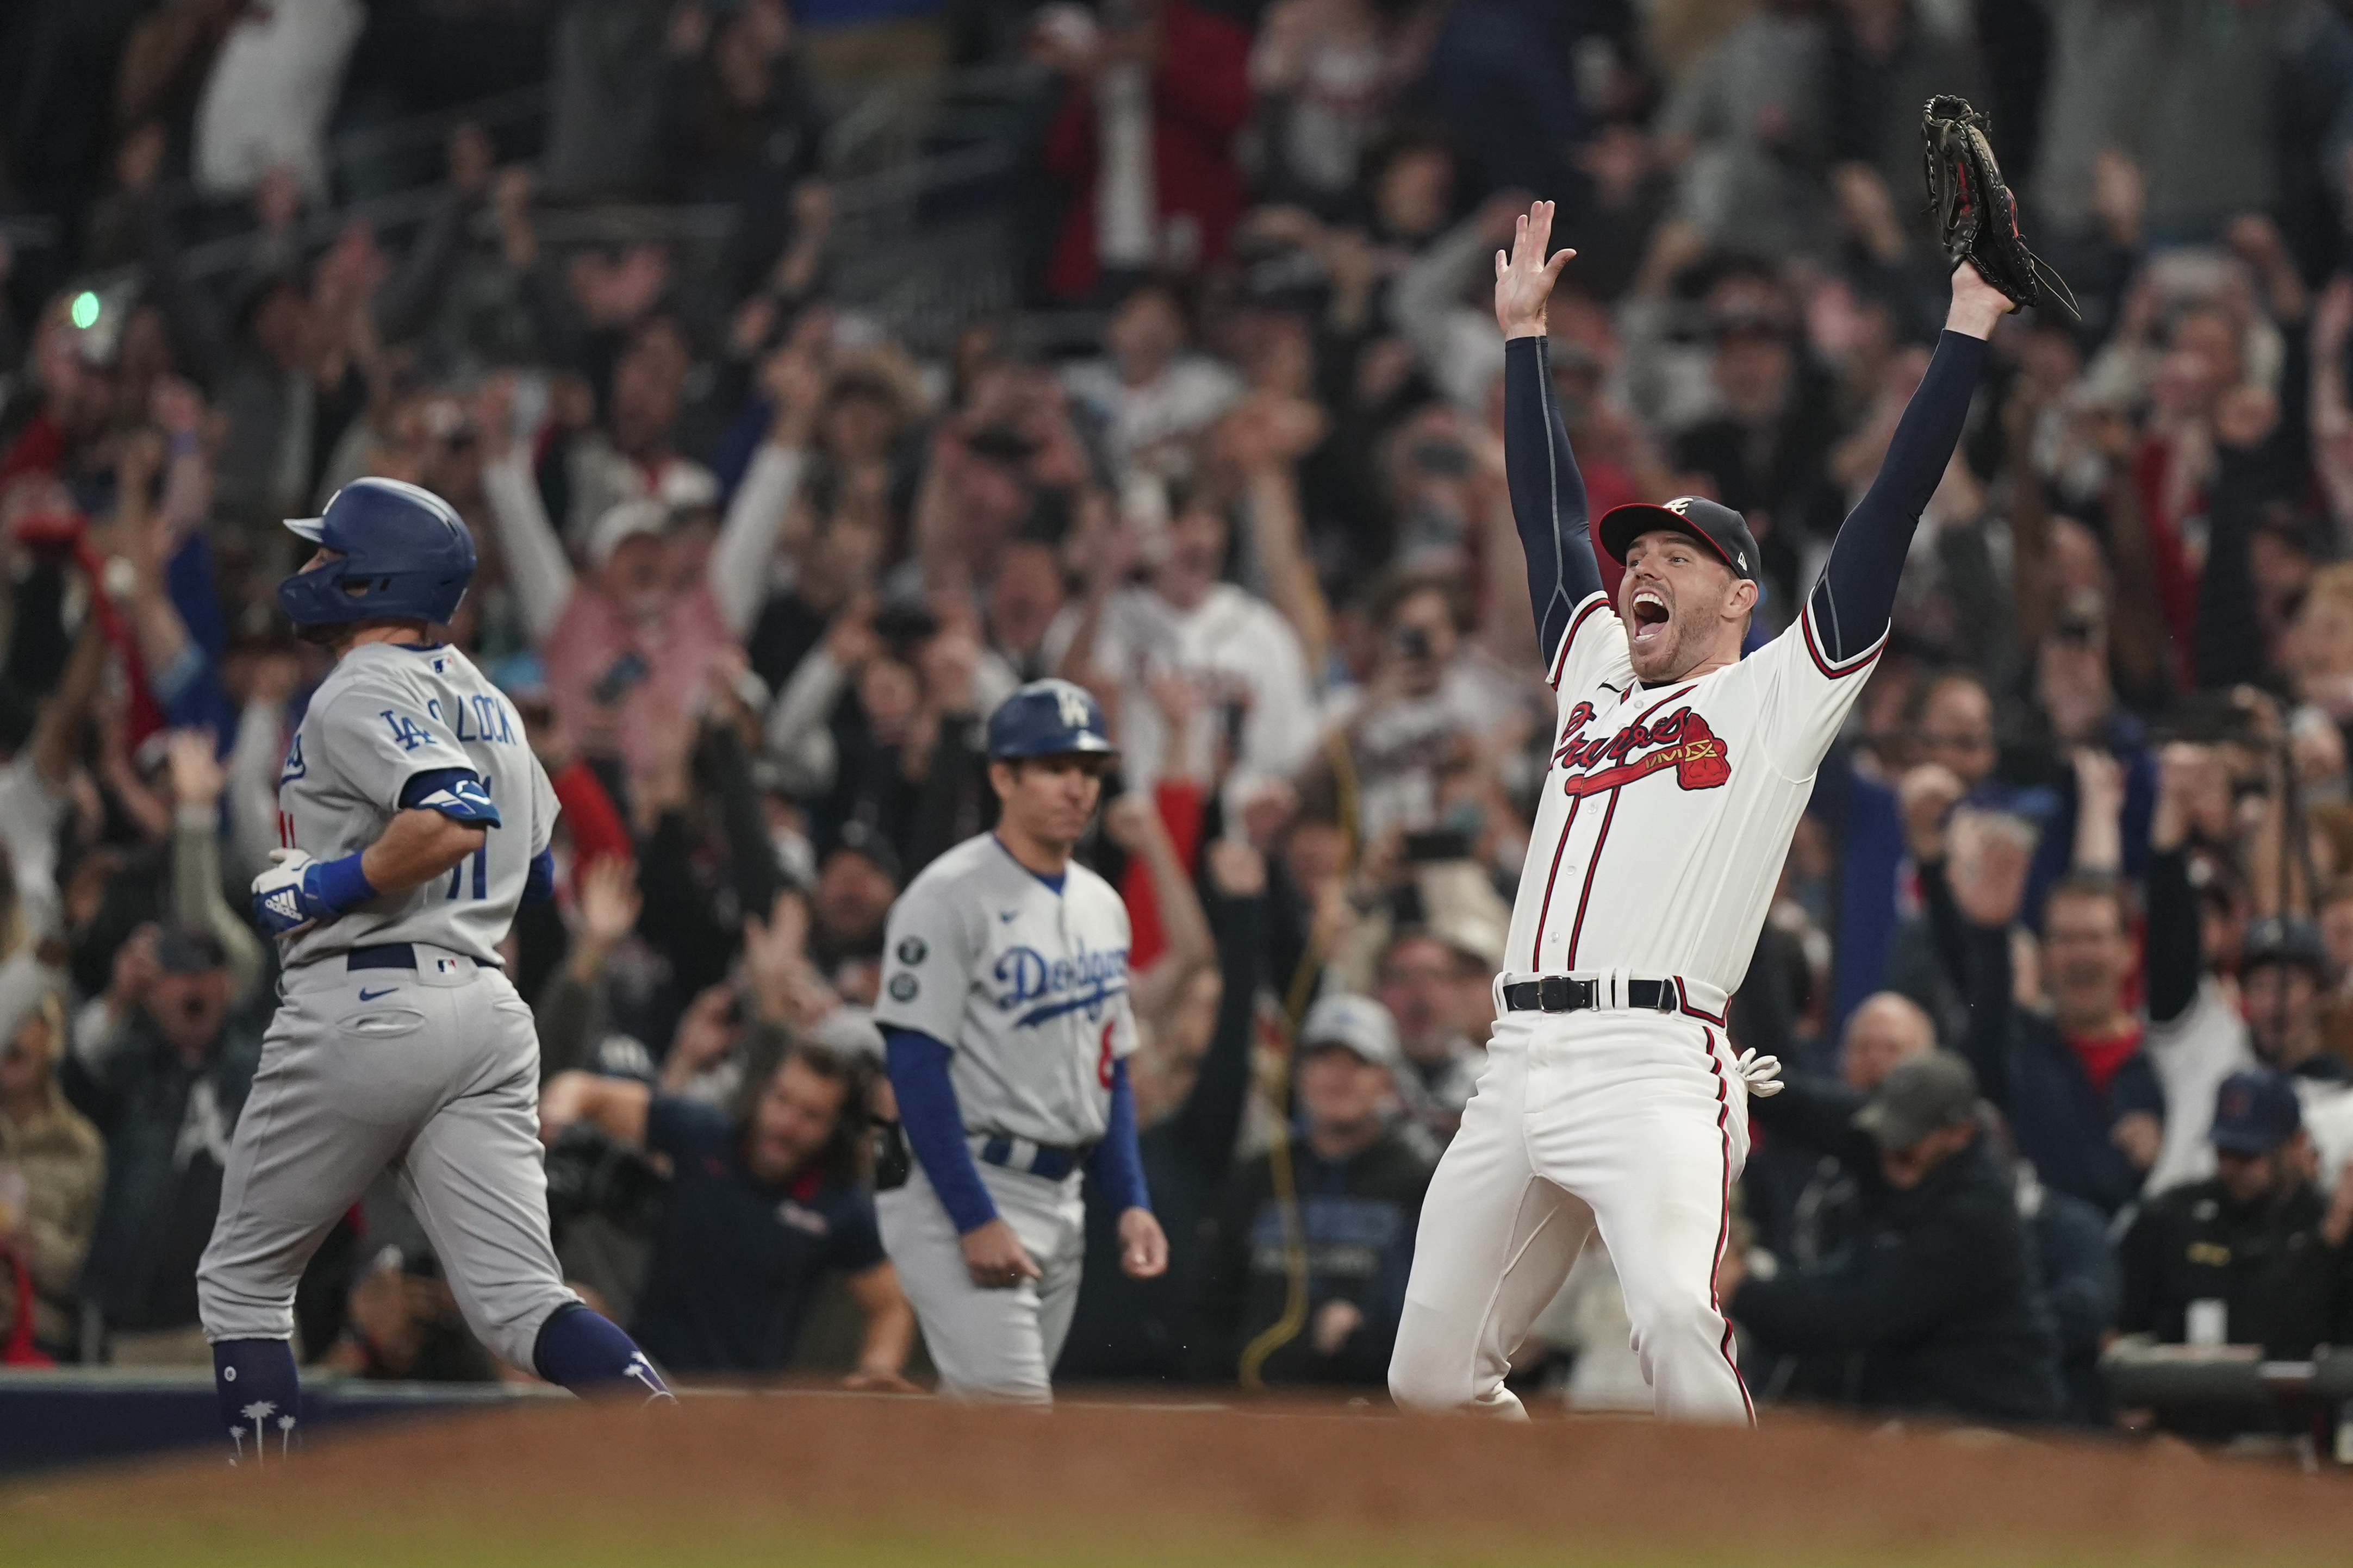 PHOTOS: Atlanta Braves Win First World Series Title in 26 Years